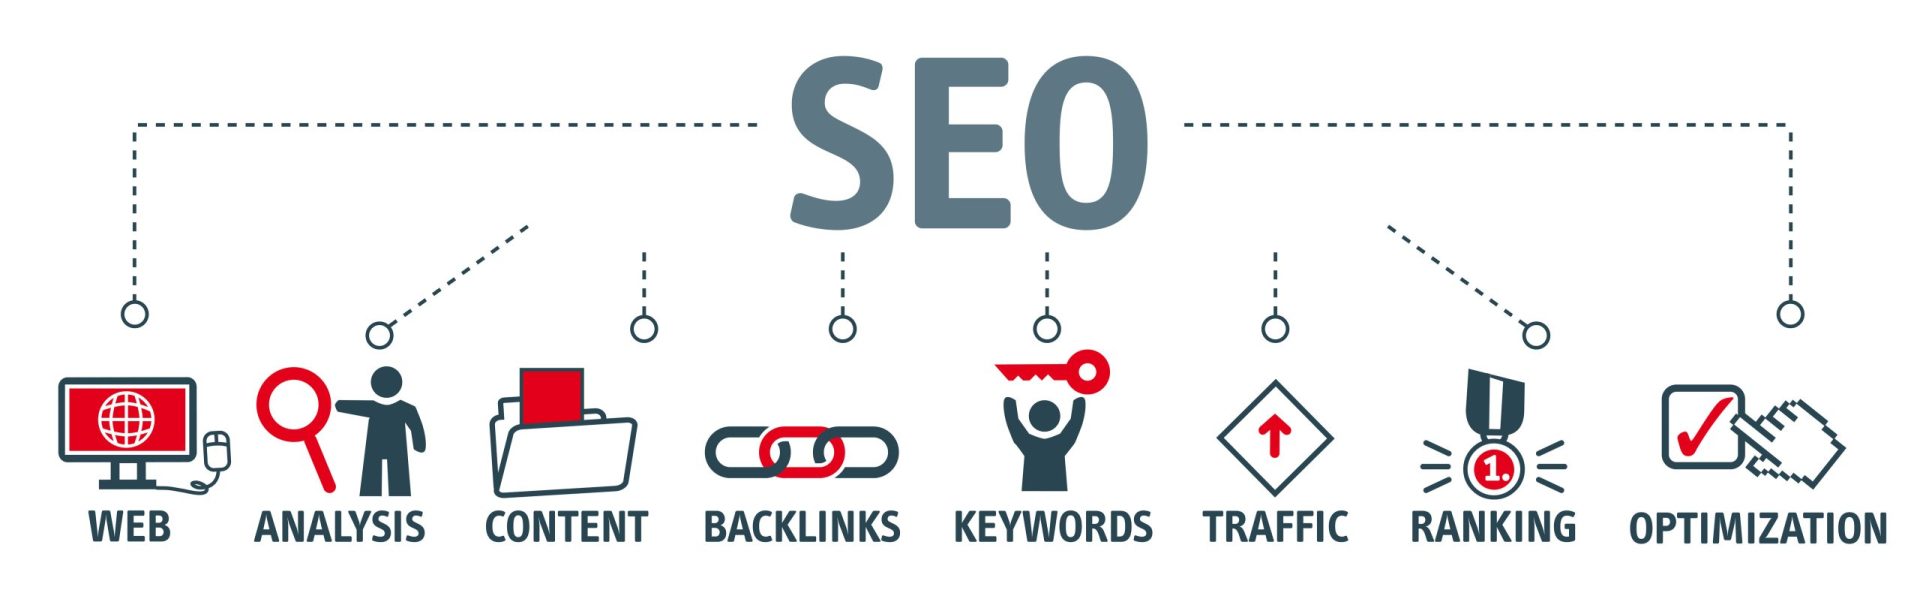 what is seo, seo basics, what is search engine optimization, web, analysis, content, backlinks, keywords, traffic, rankings, optimization